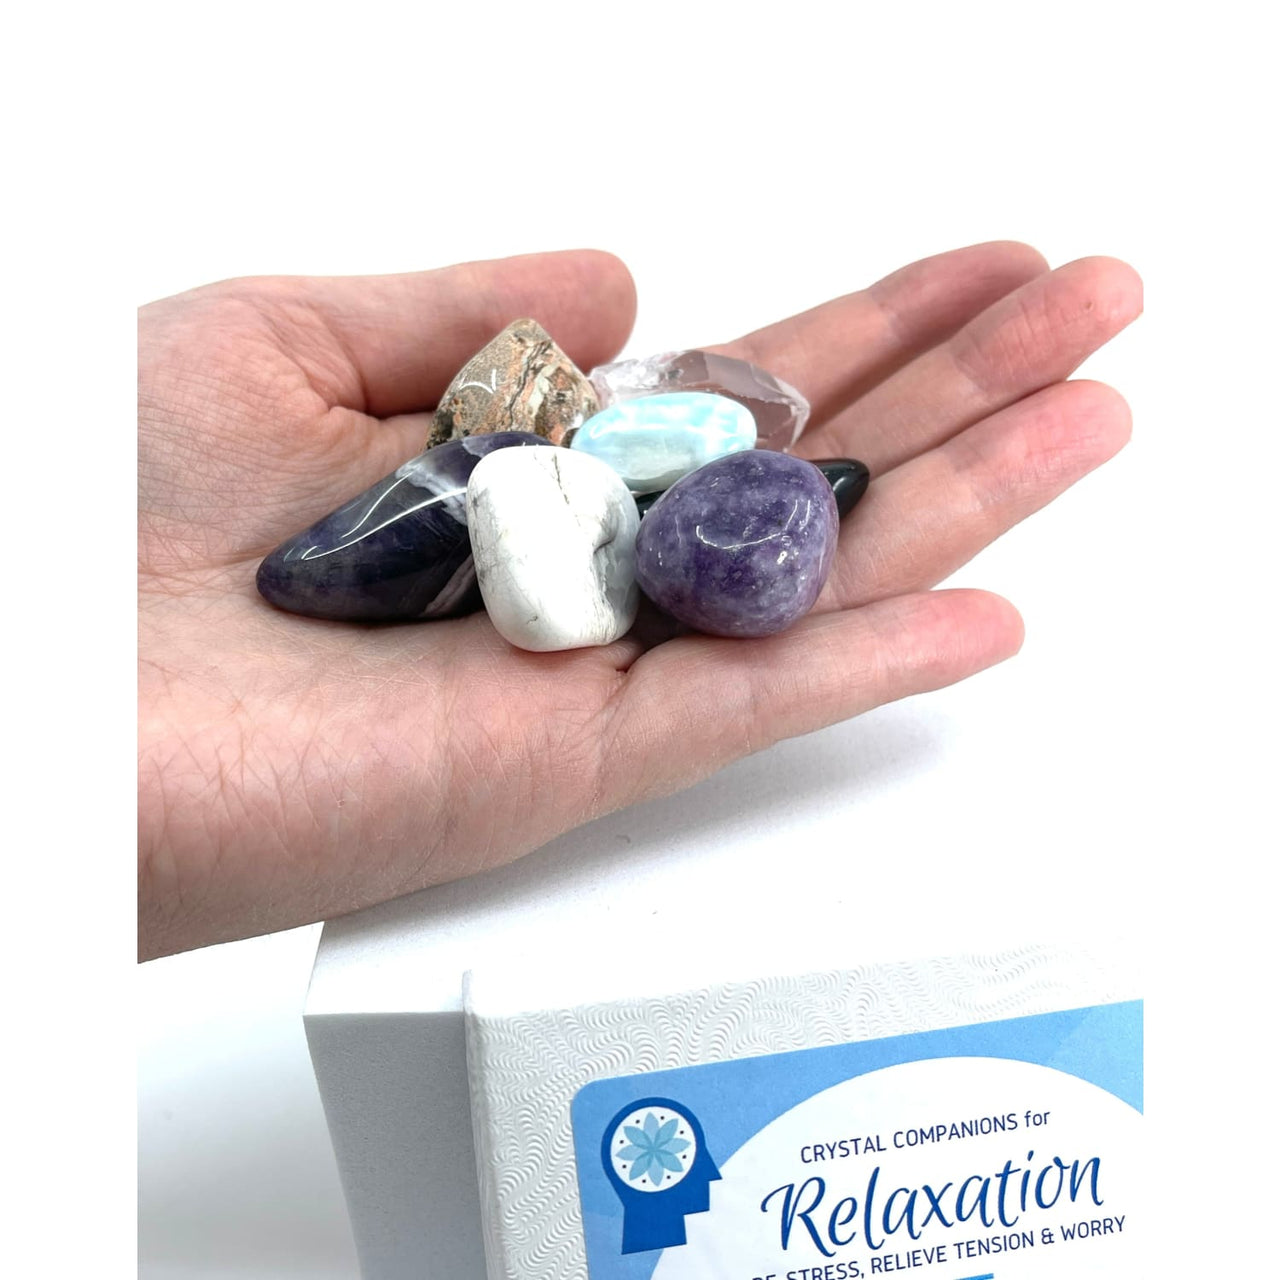 Relaxation Crystal Companion Set w Gift Box #SK6979K - $39